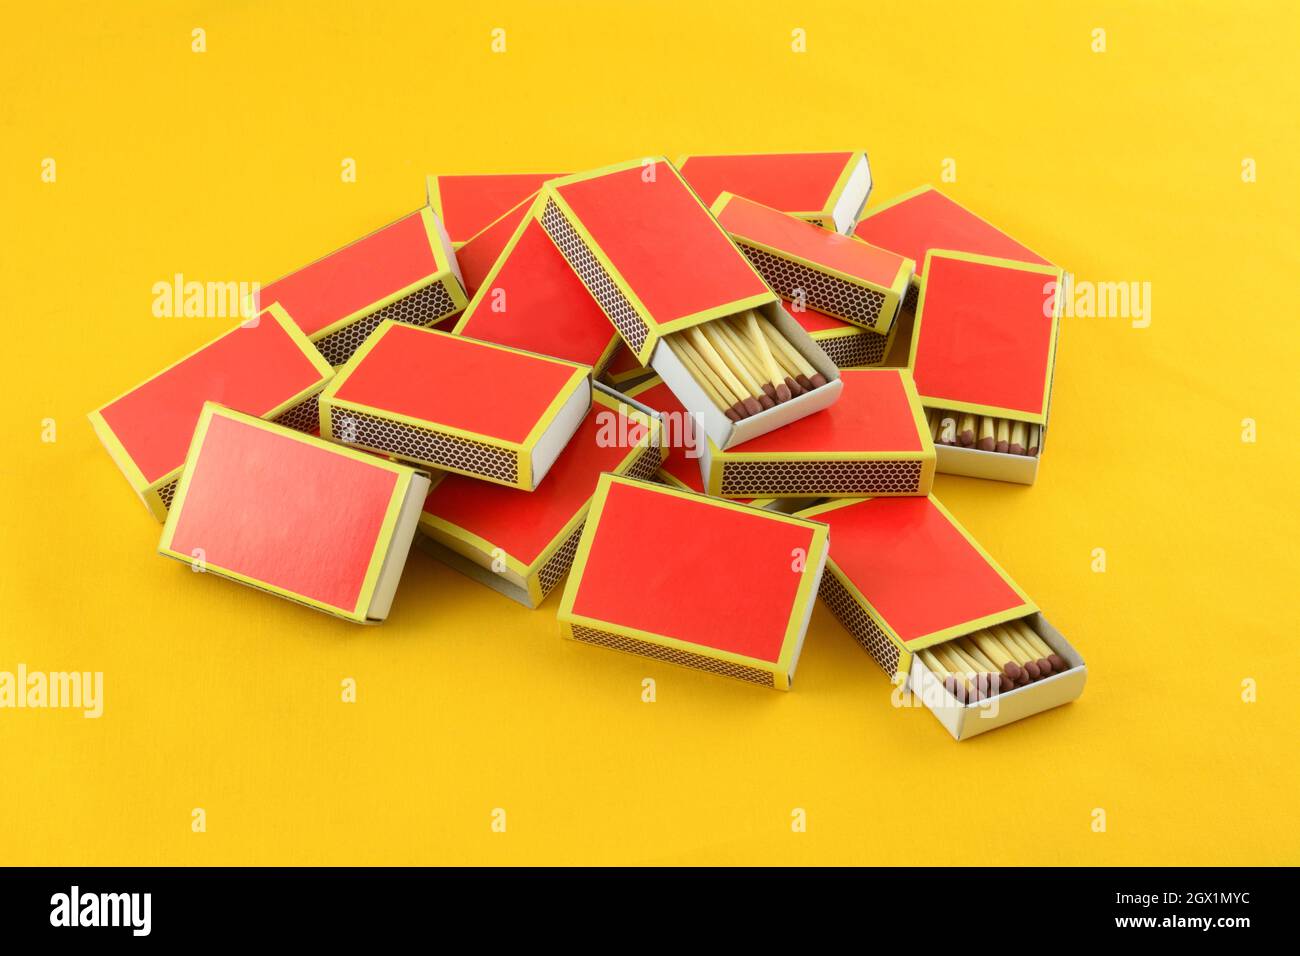 Heap of red boxes of safety matches with two open on yellow background Stock Photo